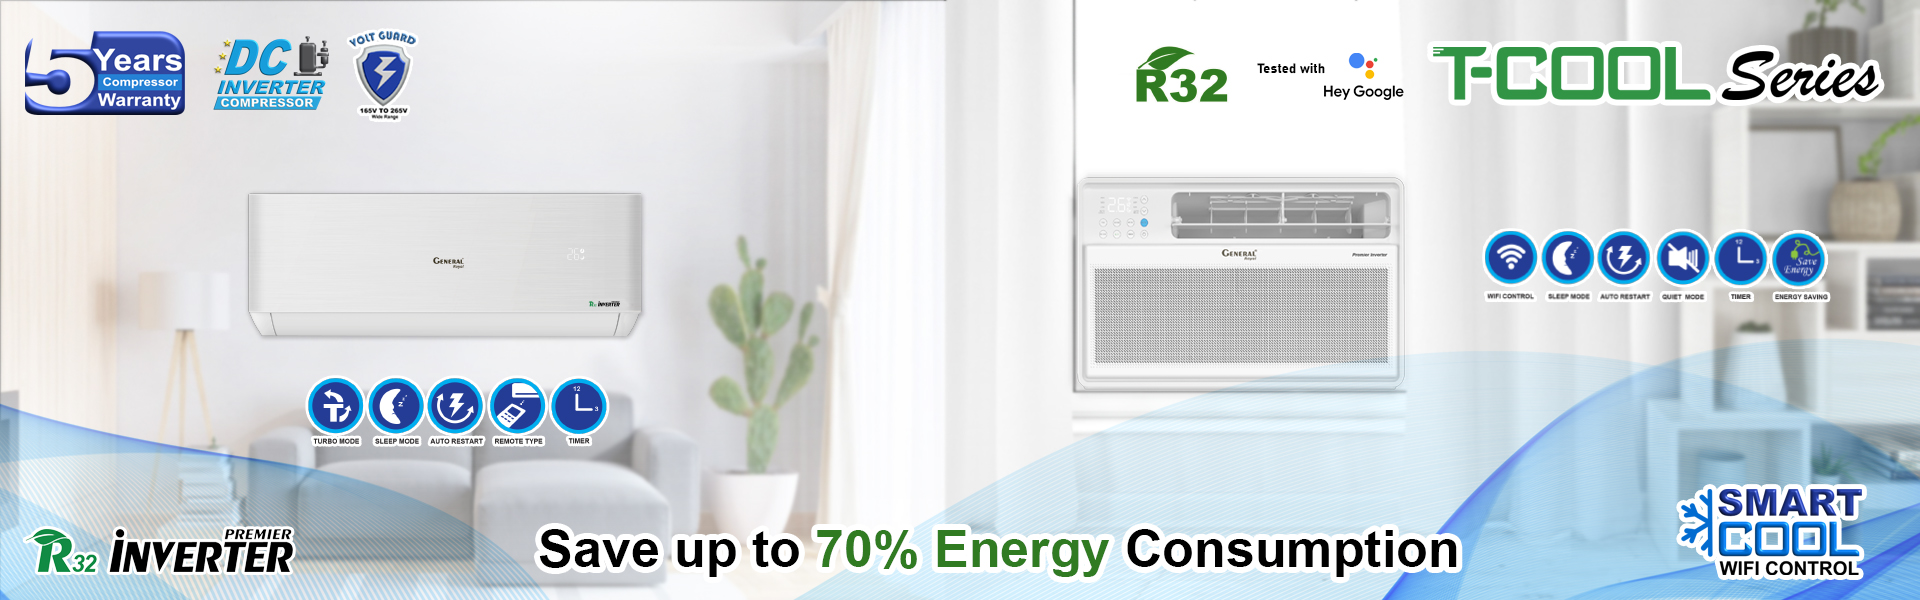 Save up to 70% Energy consuimption